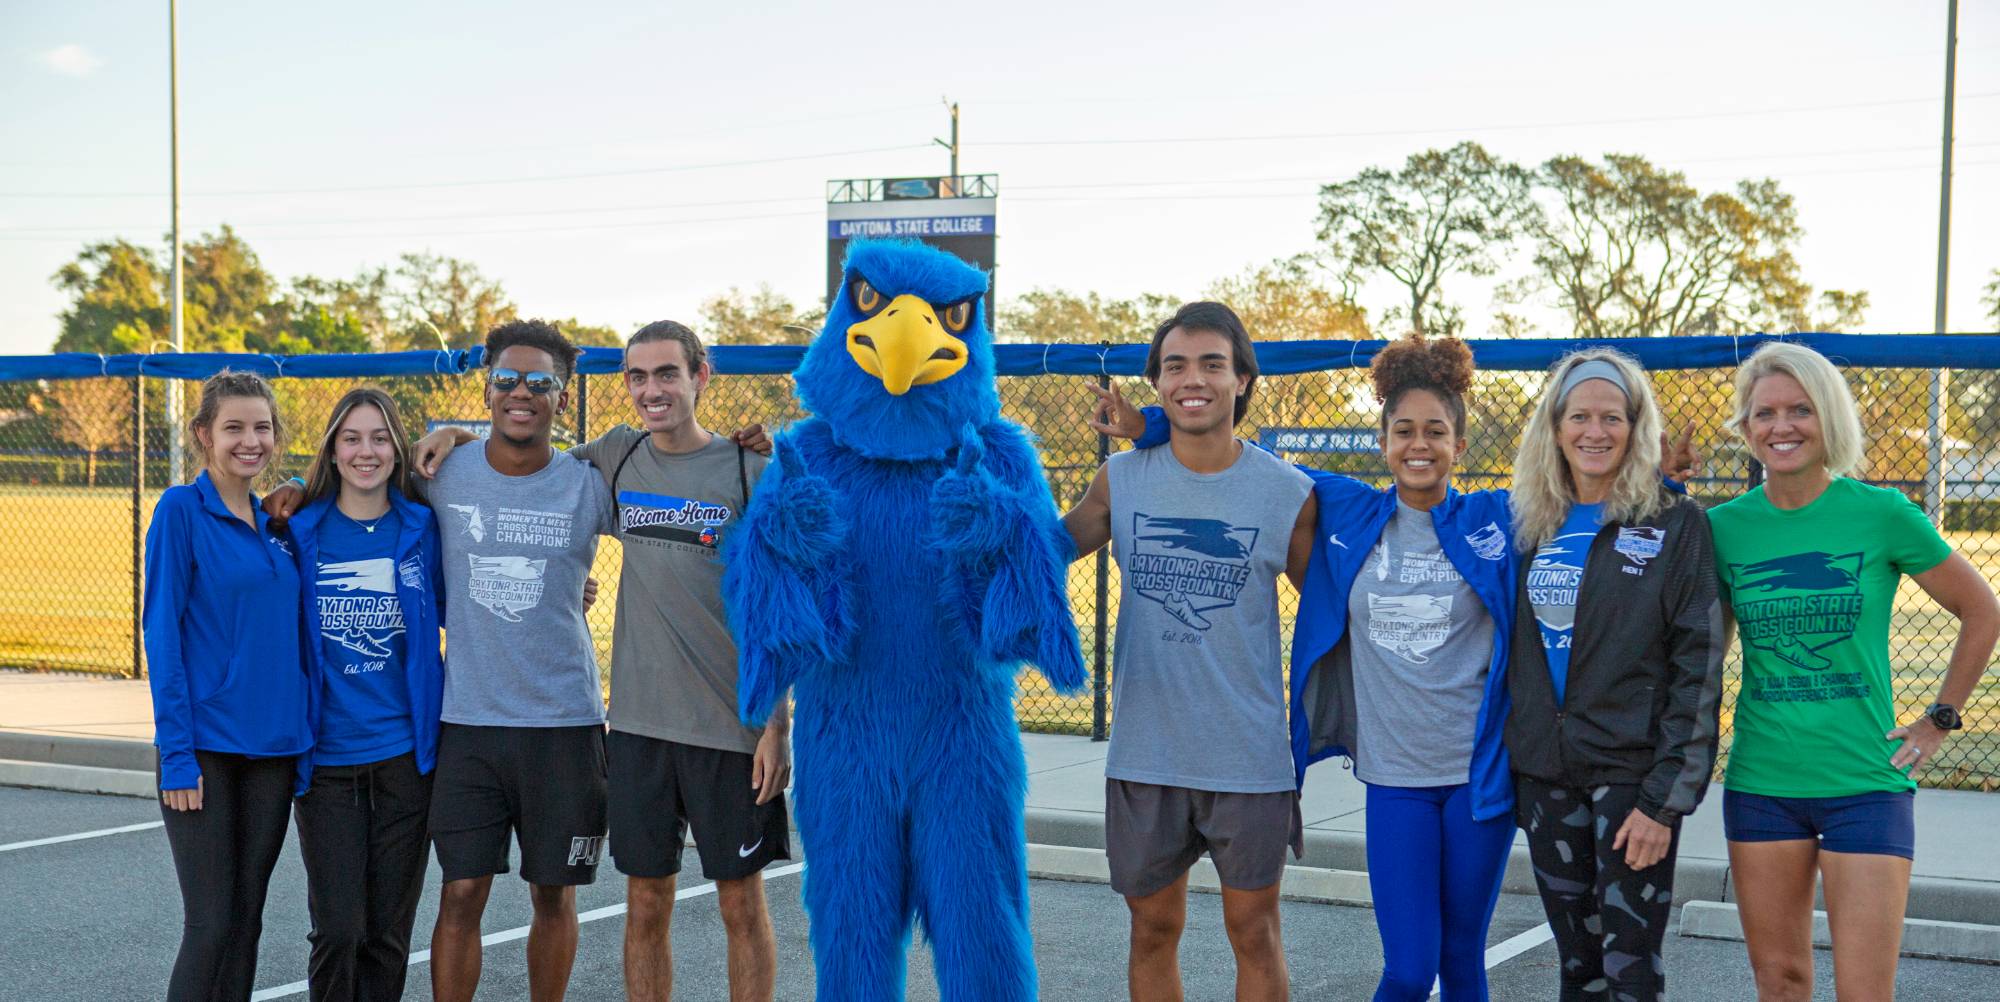 A group of students at the 5k finish line